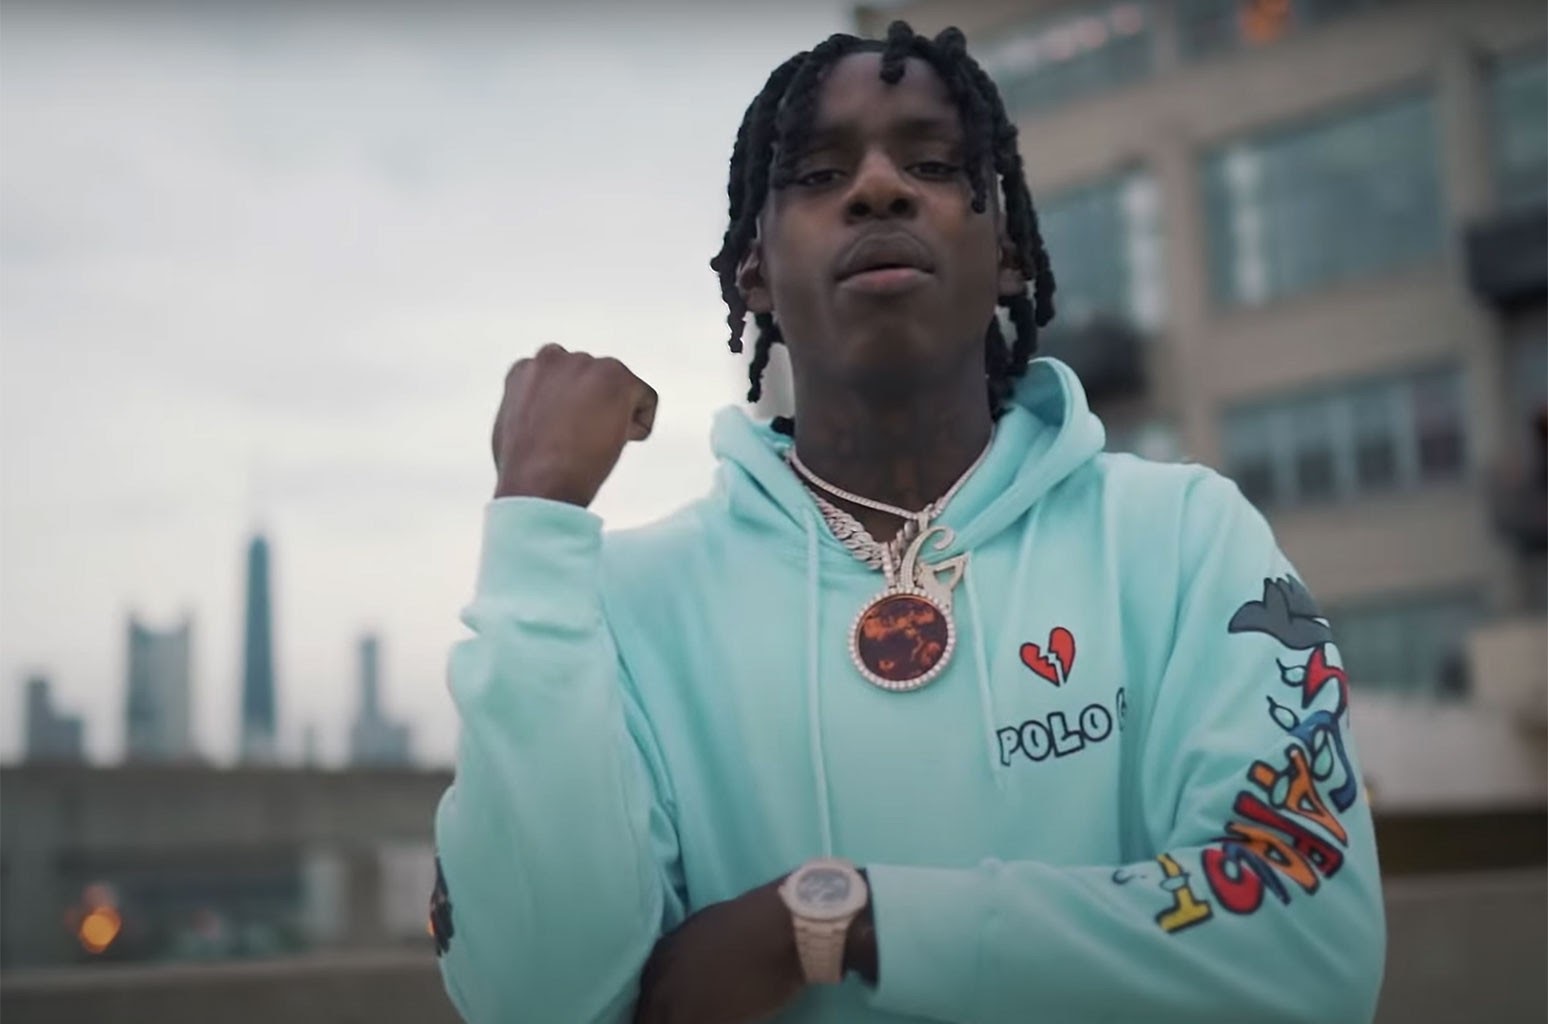 How Much Does Polo G Spend on Jewelry?